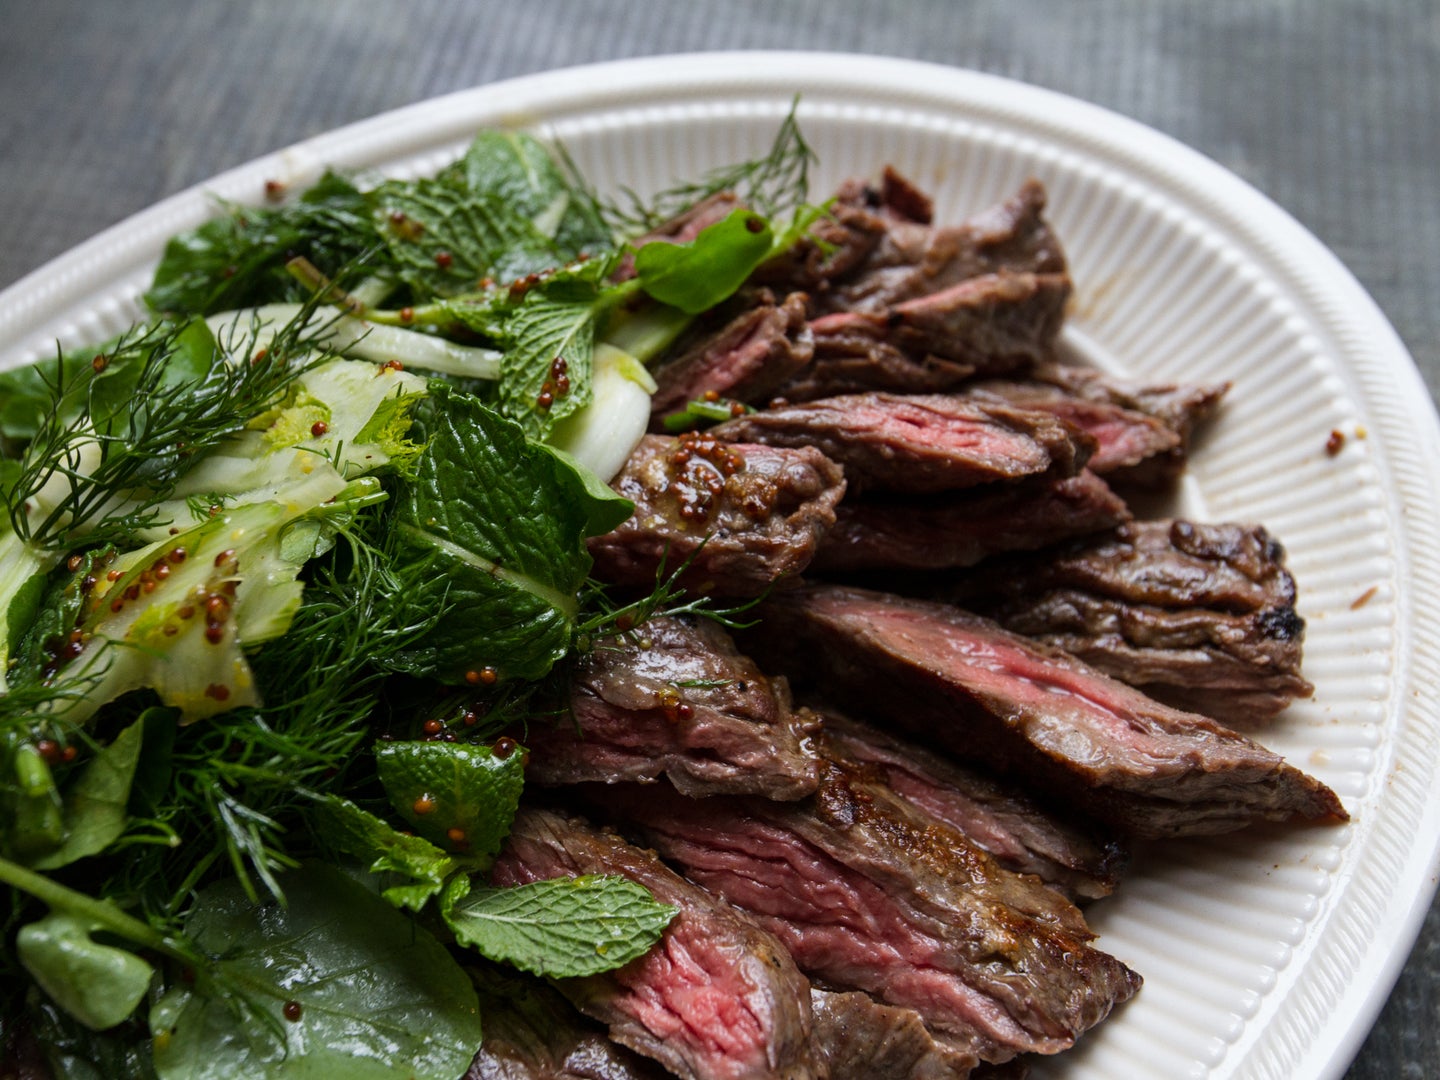 Grilled Skirt Steak with Herb Salad